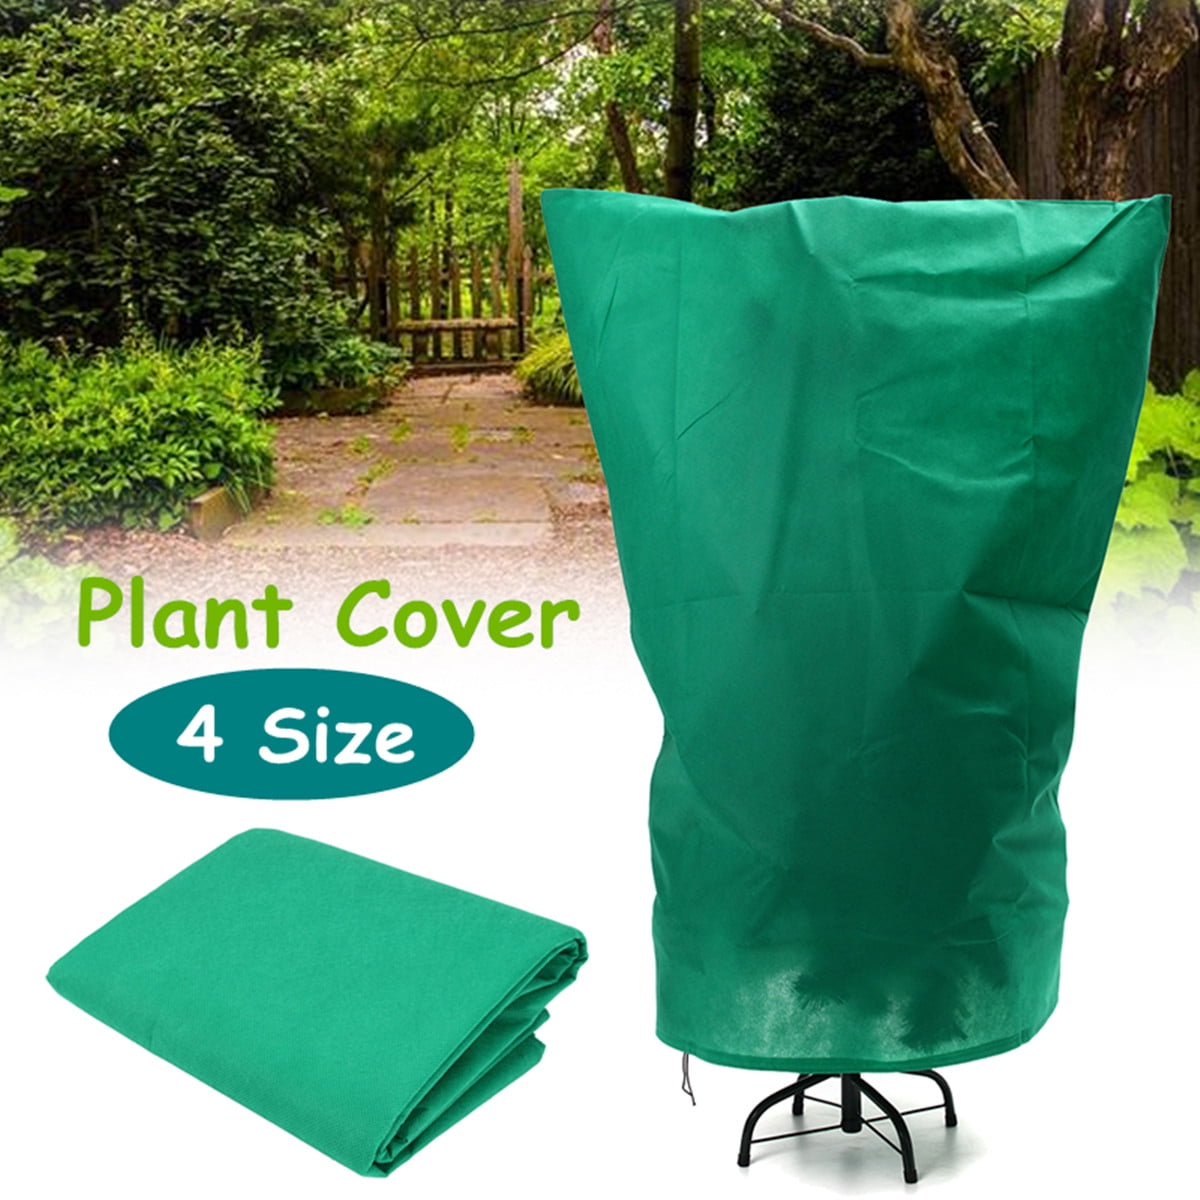 Large Size Winter Drawstring Plant Cover Frost Protection Bag Anti-Freeze Jacket Warm Blanket for Shrub Tree Greenhouse Bag Plant Protection Cover Bags Winter Plant Covers 